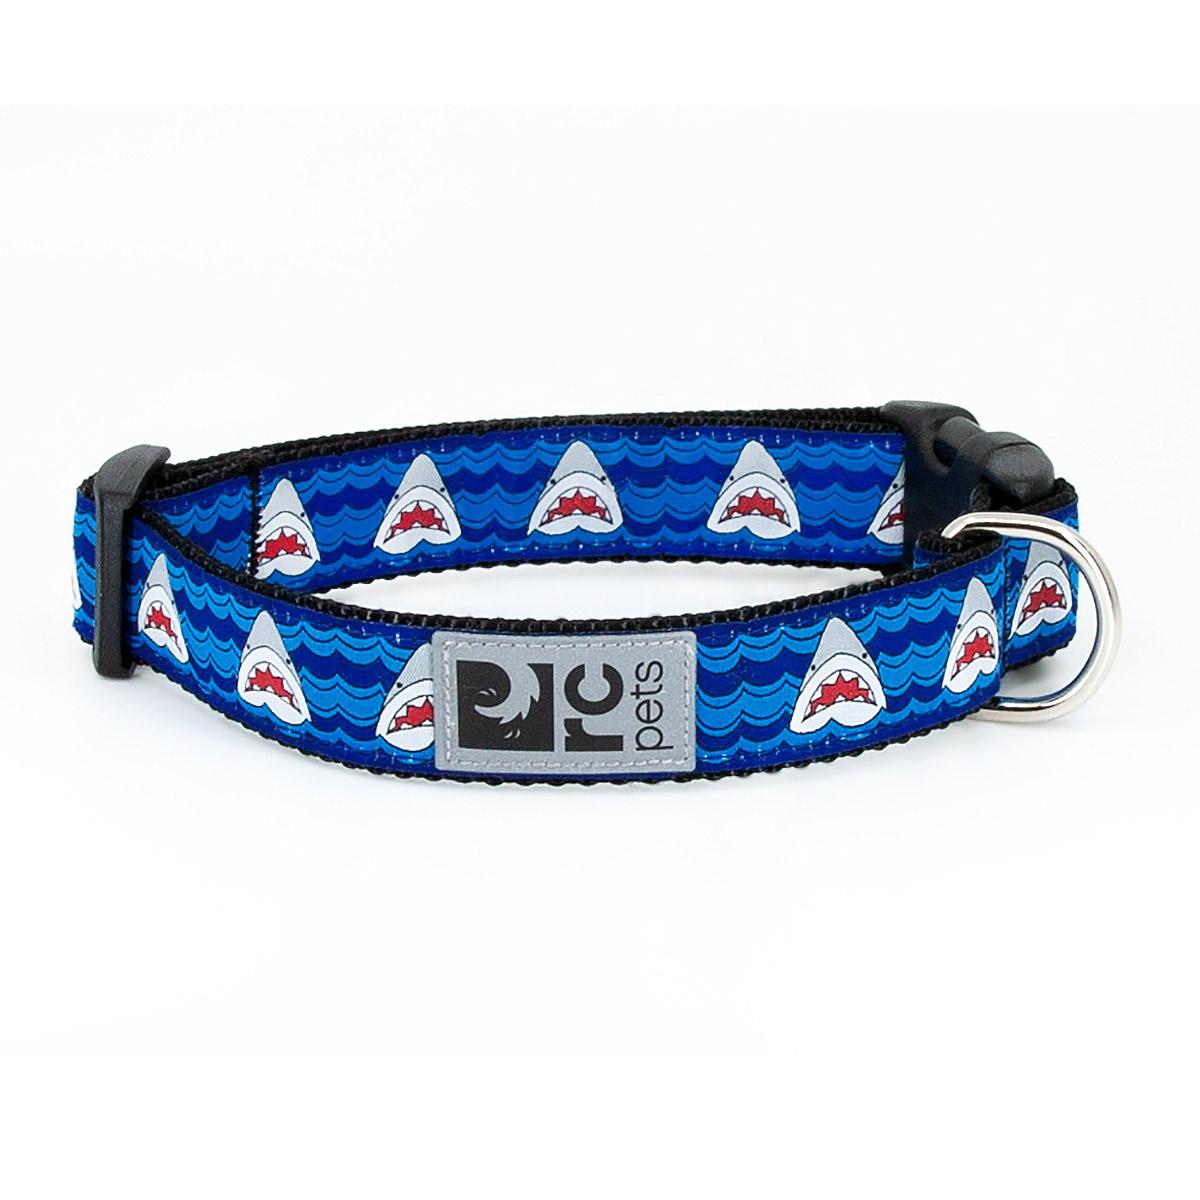 Shark Attack Adjustable Clip Dog Collar By RC Pets